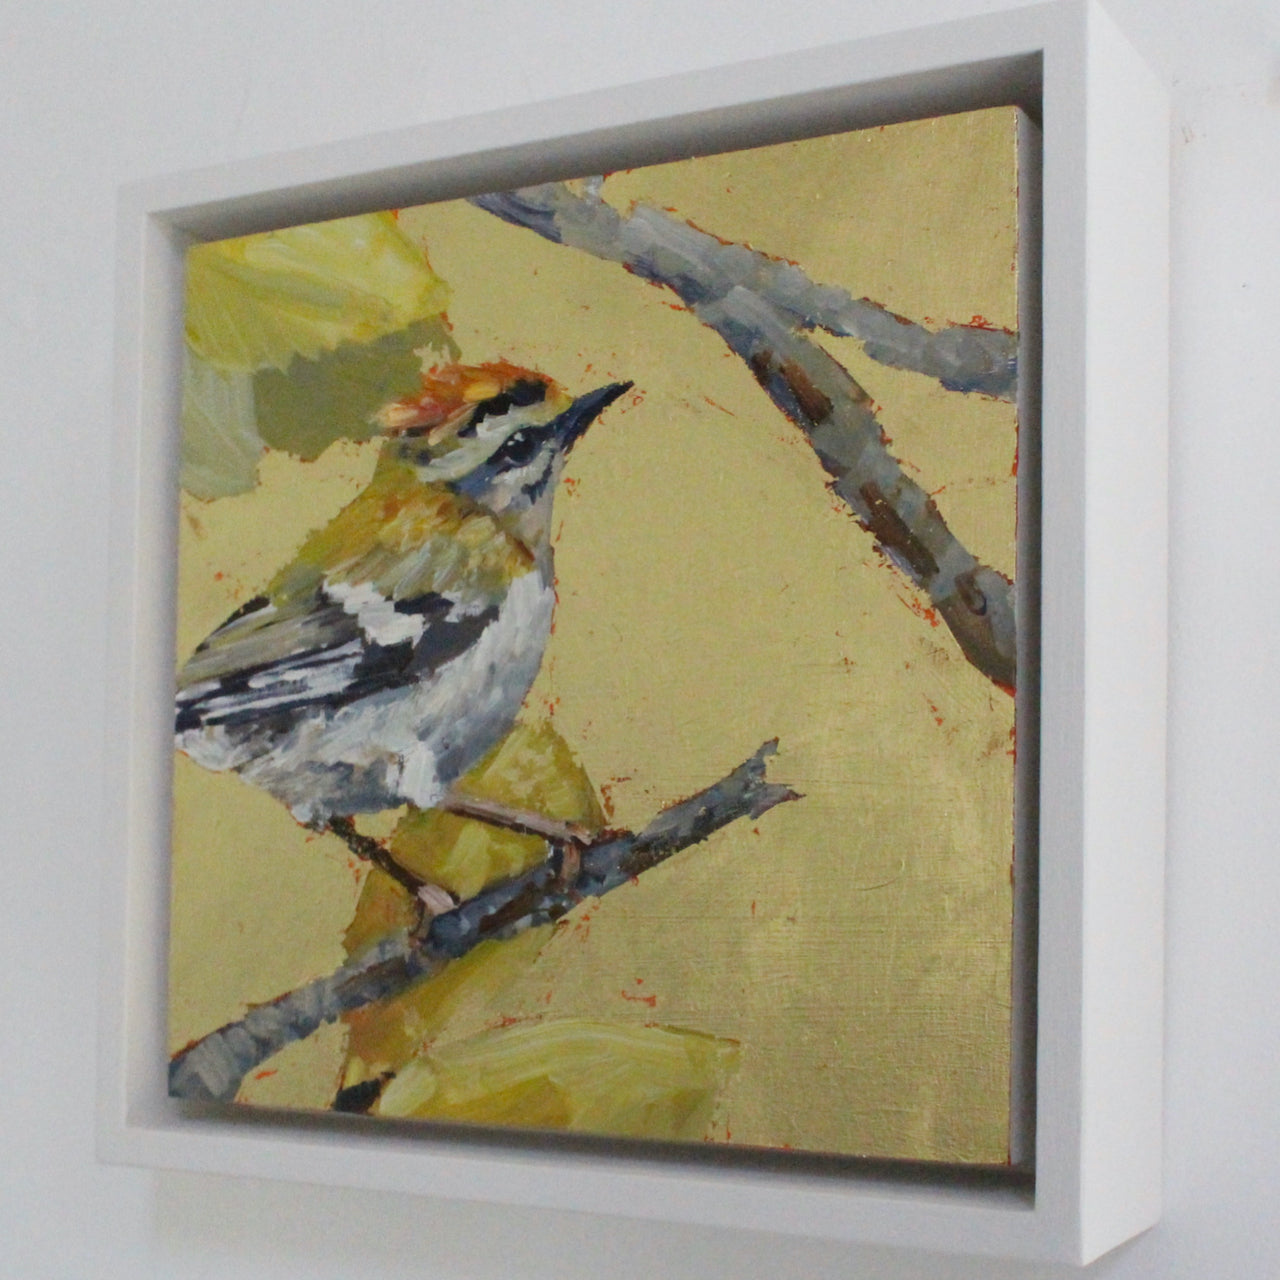 a framed Jill Hudson painting of Fire Crest bird on a twig with a gold leaf background 